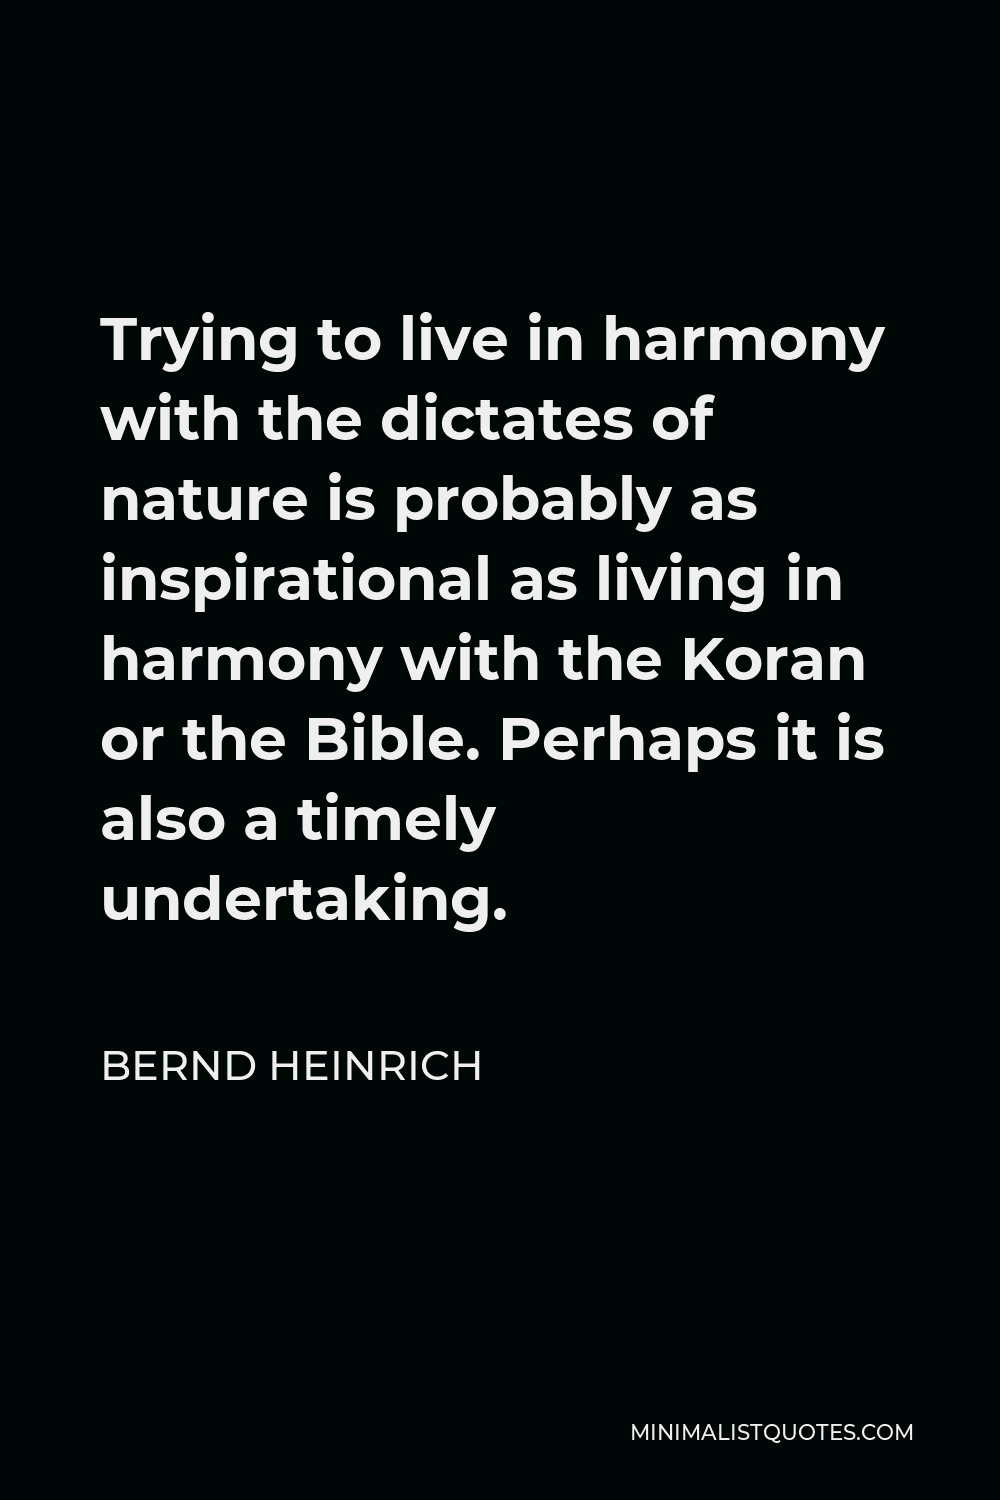 Bernd Heinrich Quote - Trying to live in harmony with the dictates of nature is probably as inspirational as living in harmony with the Koran or the Bible. Perhaps it is also a timely undertaking.